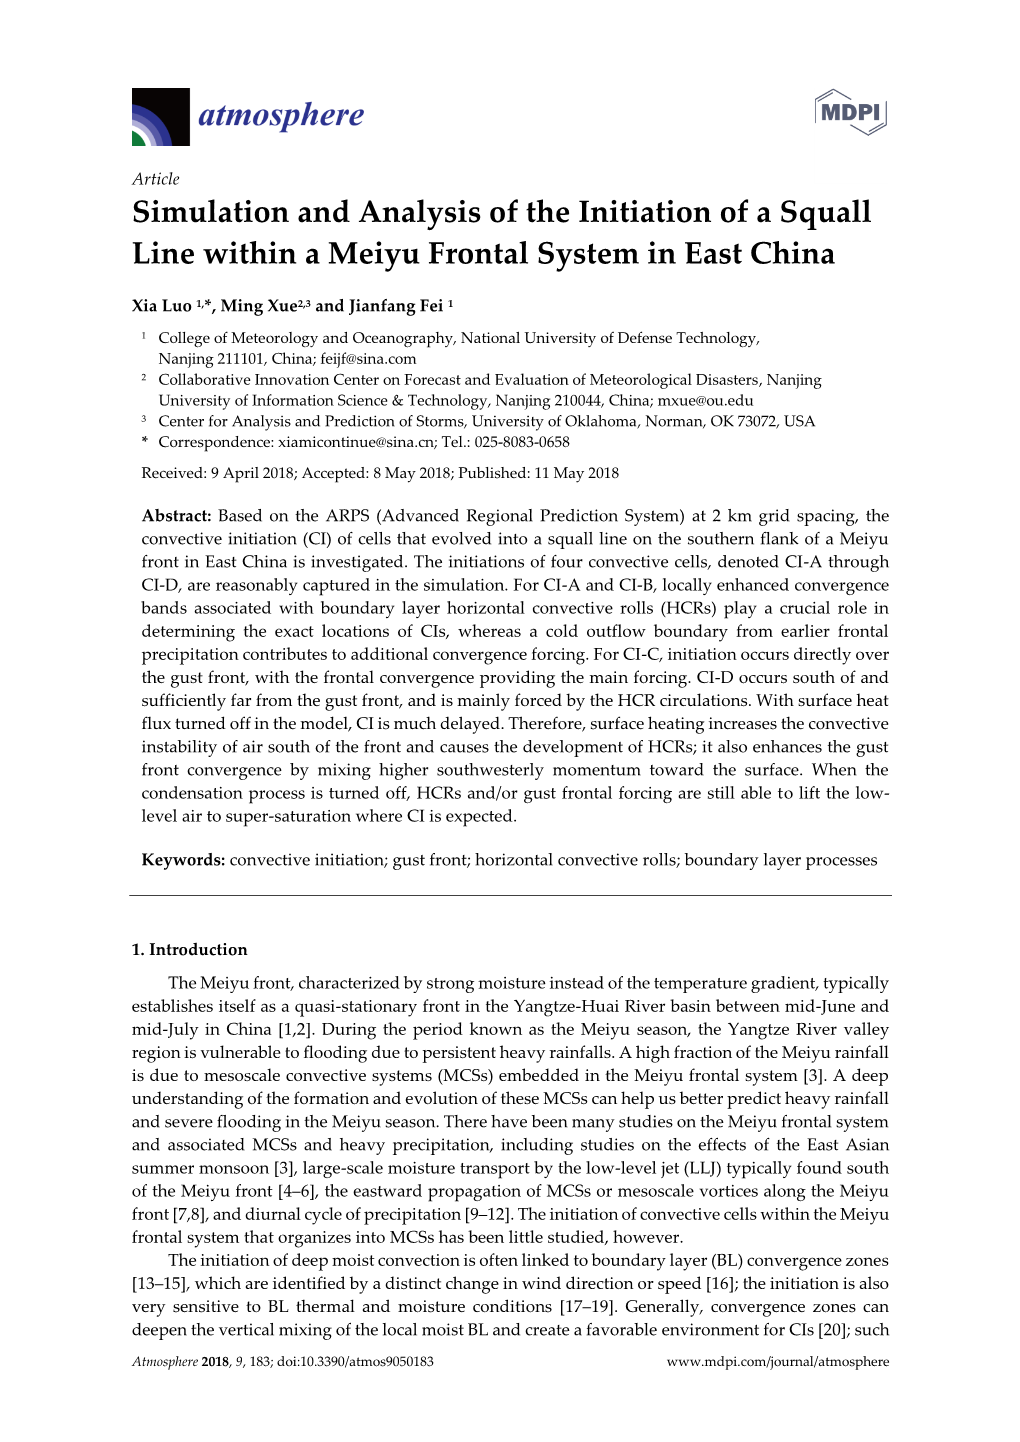 Simulation and Analysis of the Initiation of a Squall Line Within a Meiyu Frontal System in East China